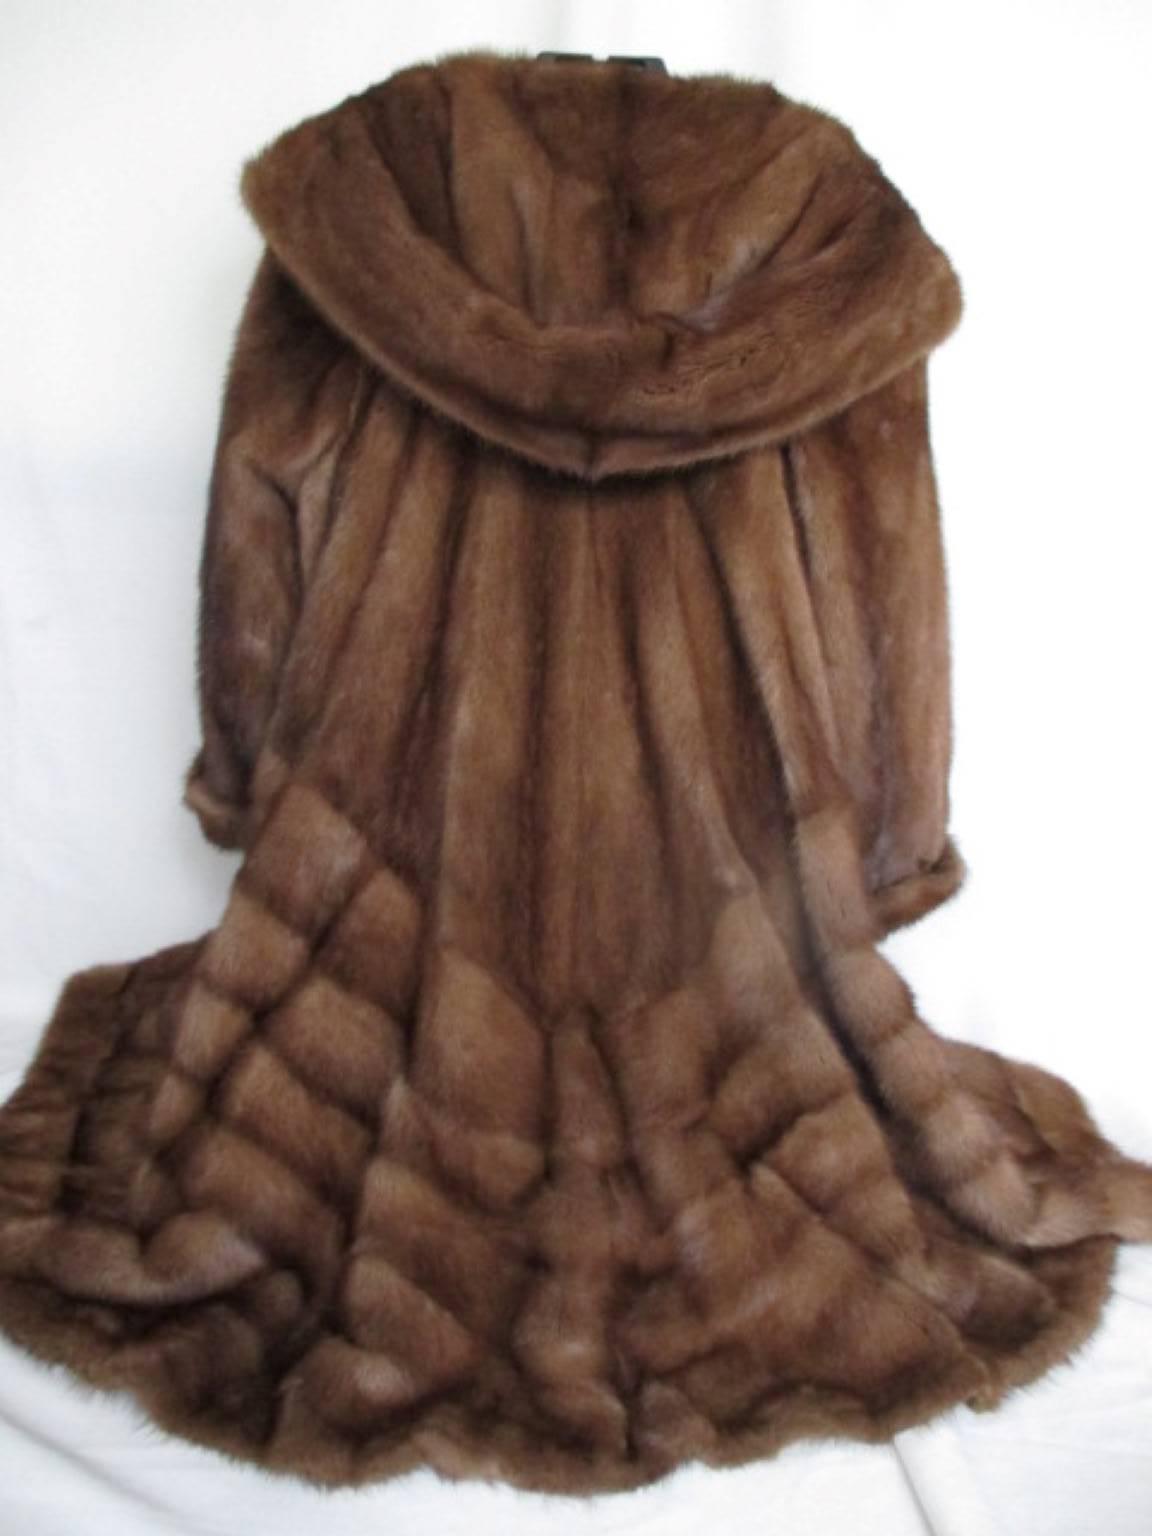 We offer more luxury fur items, view our frontstore.

Details:
This flared 3/4 length chestnut brown mink coat is made of quality fur with a large hood, 2 buttons at the collar, 3 closing hooks and 2 velvet pockets.
It's in pre loved condition with